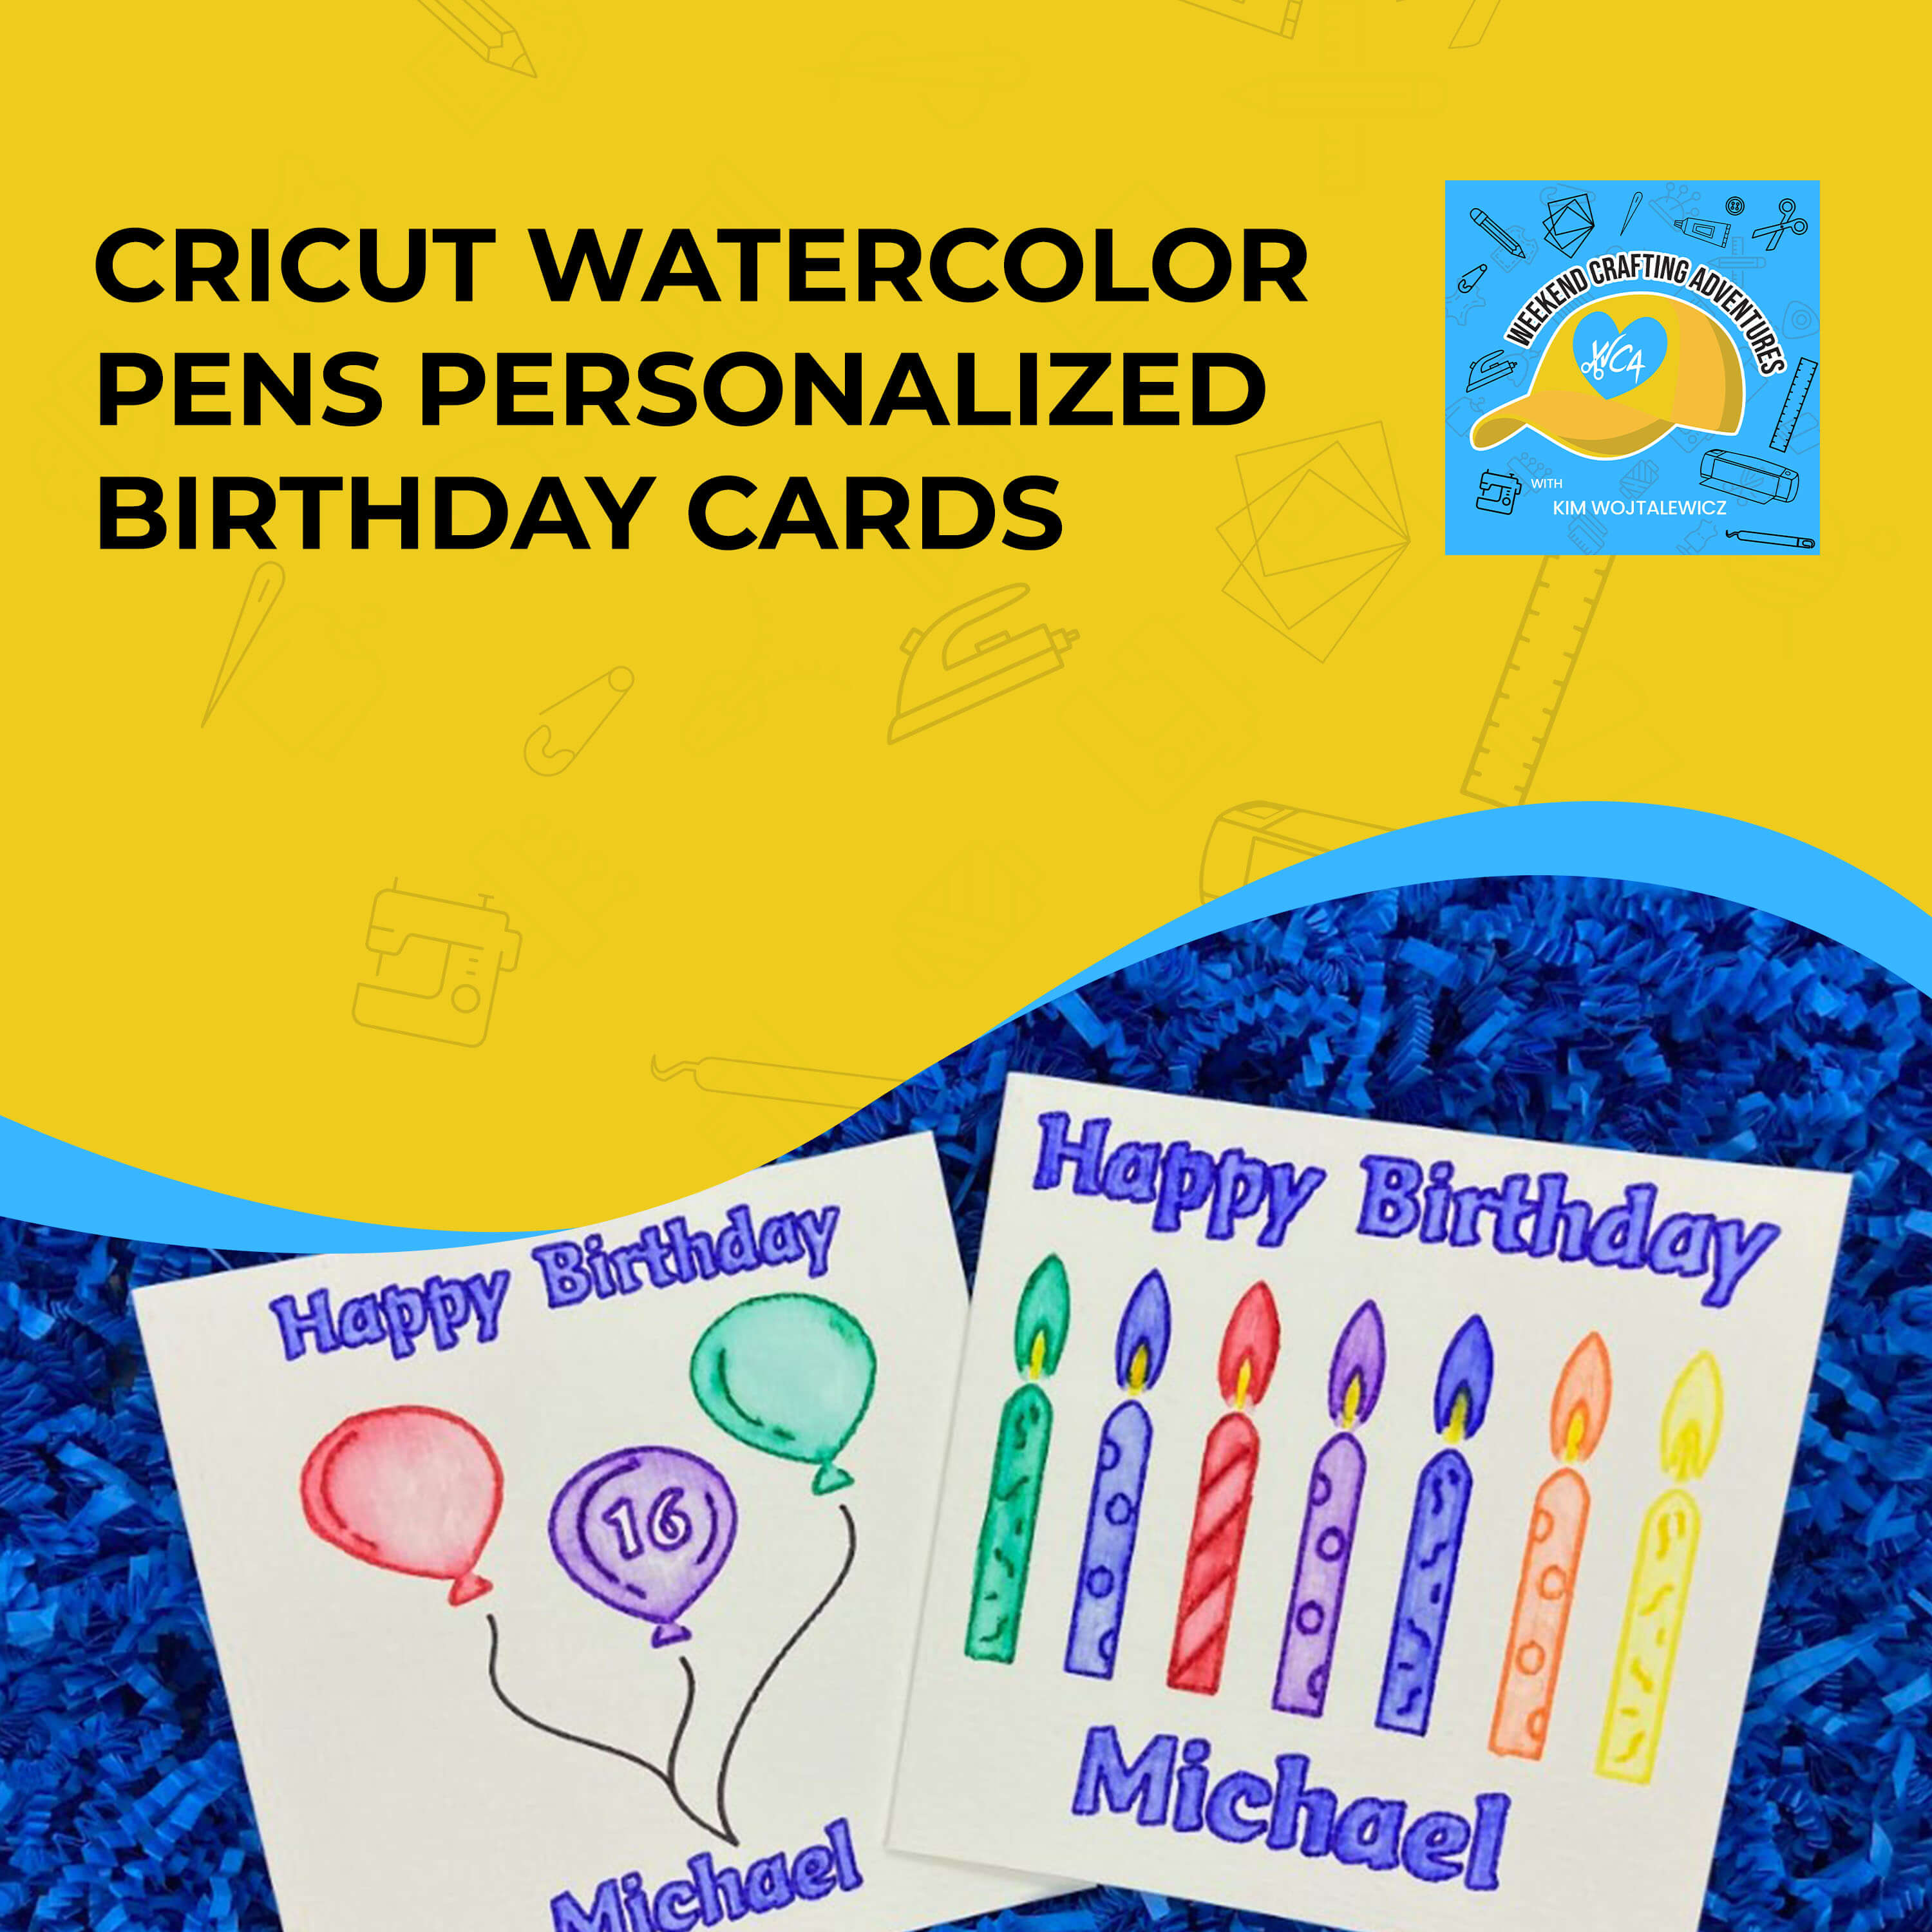 Cricut Watercolor Pens Personalized Birthday Cards - Weekend